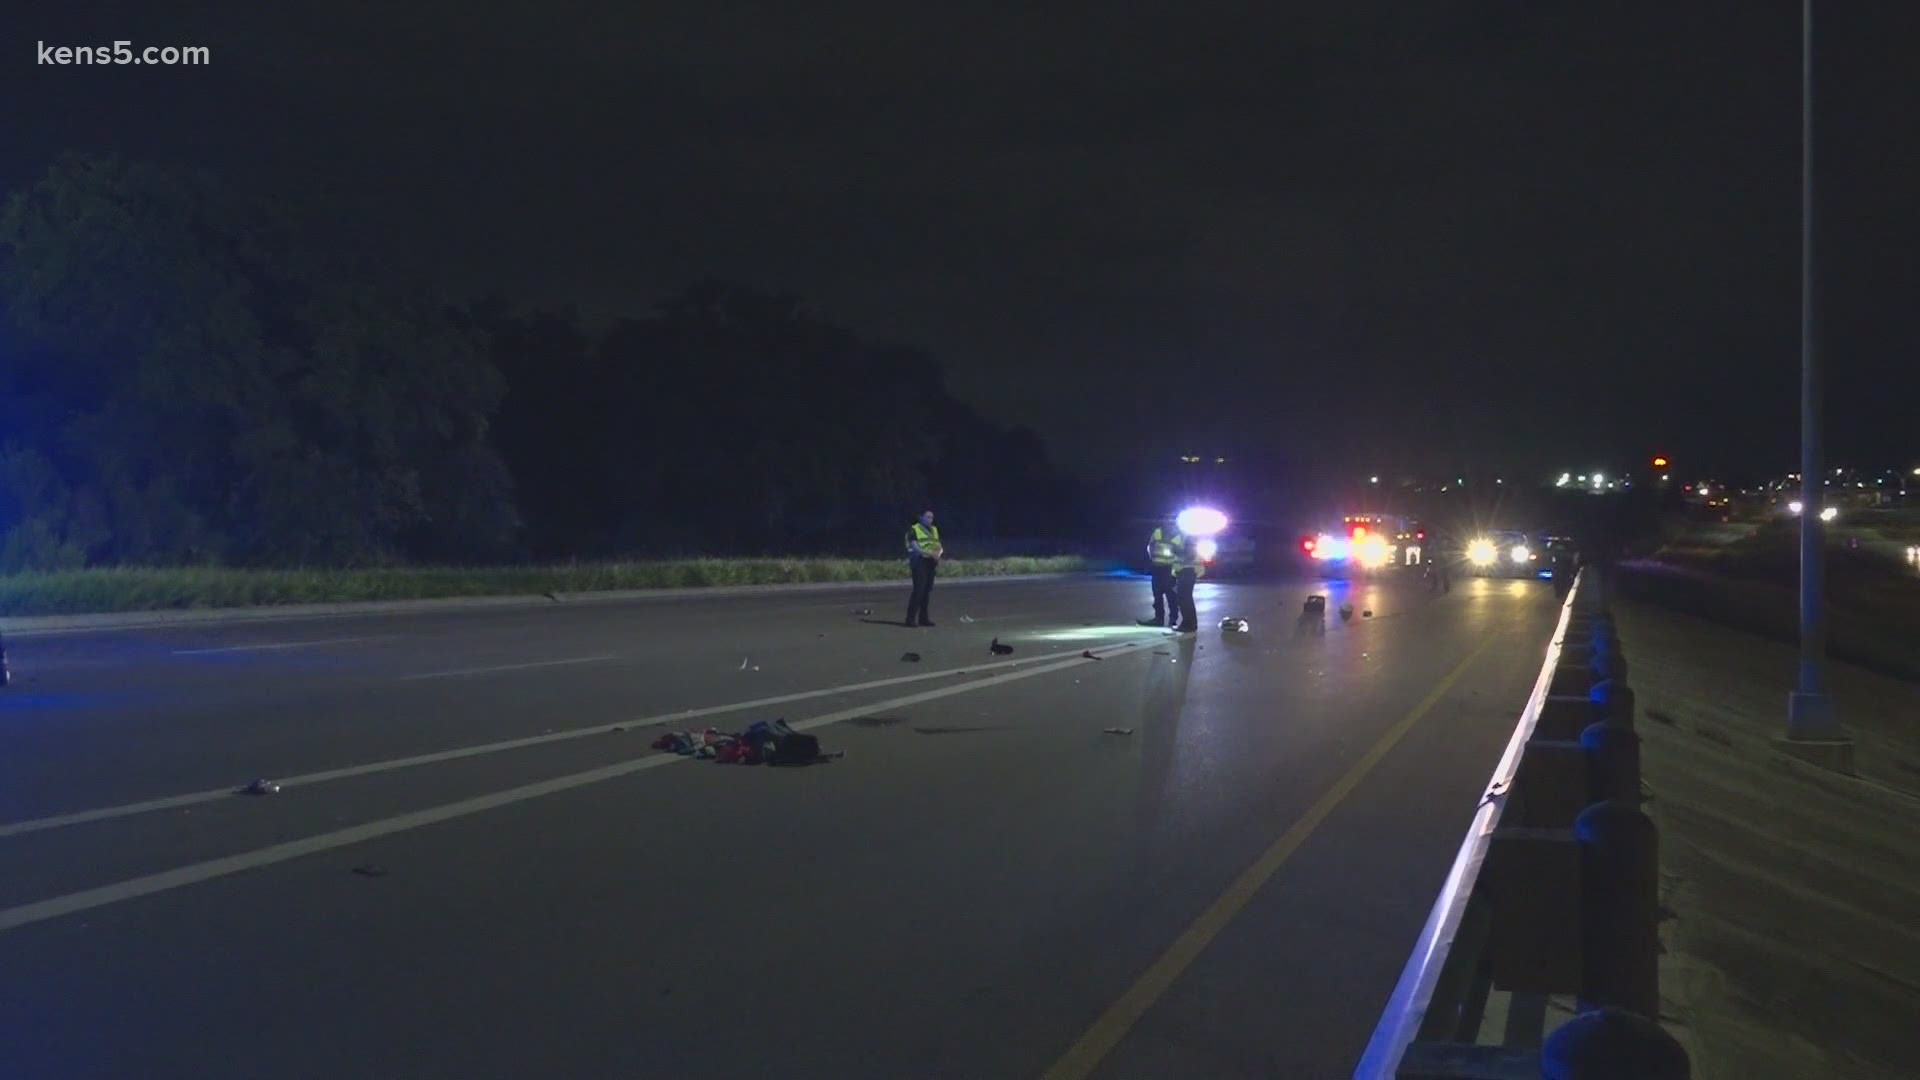 Police are looking for the person who hit and killed a woman on the west side of San Antonio early Thursday morning.